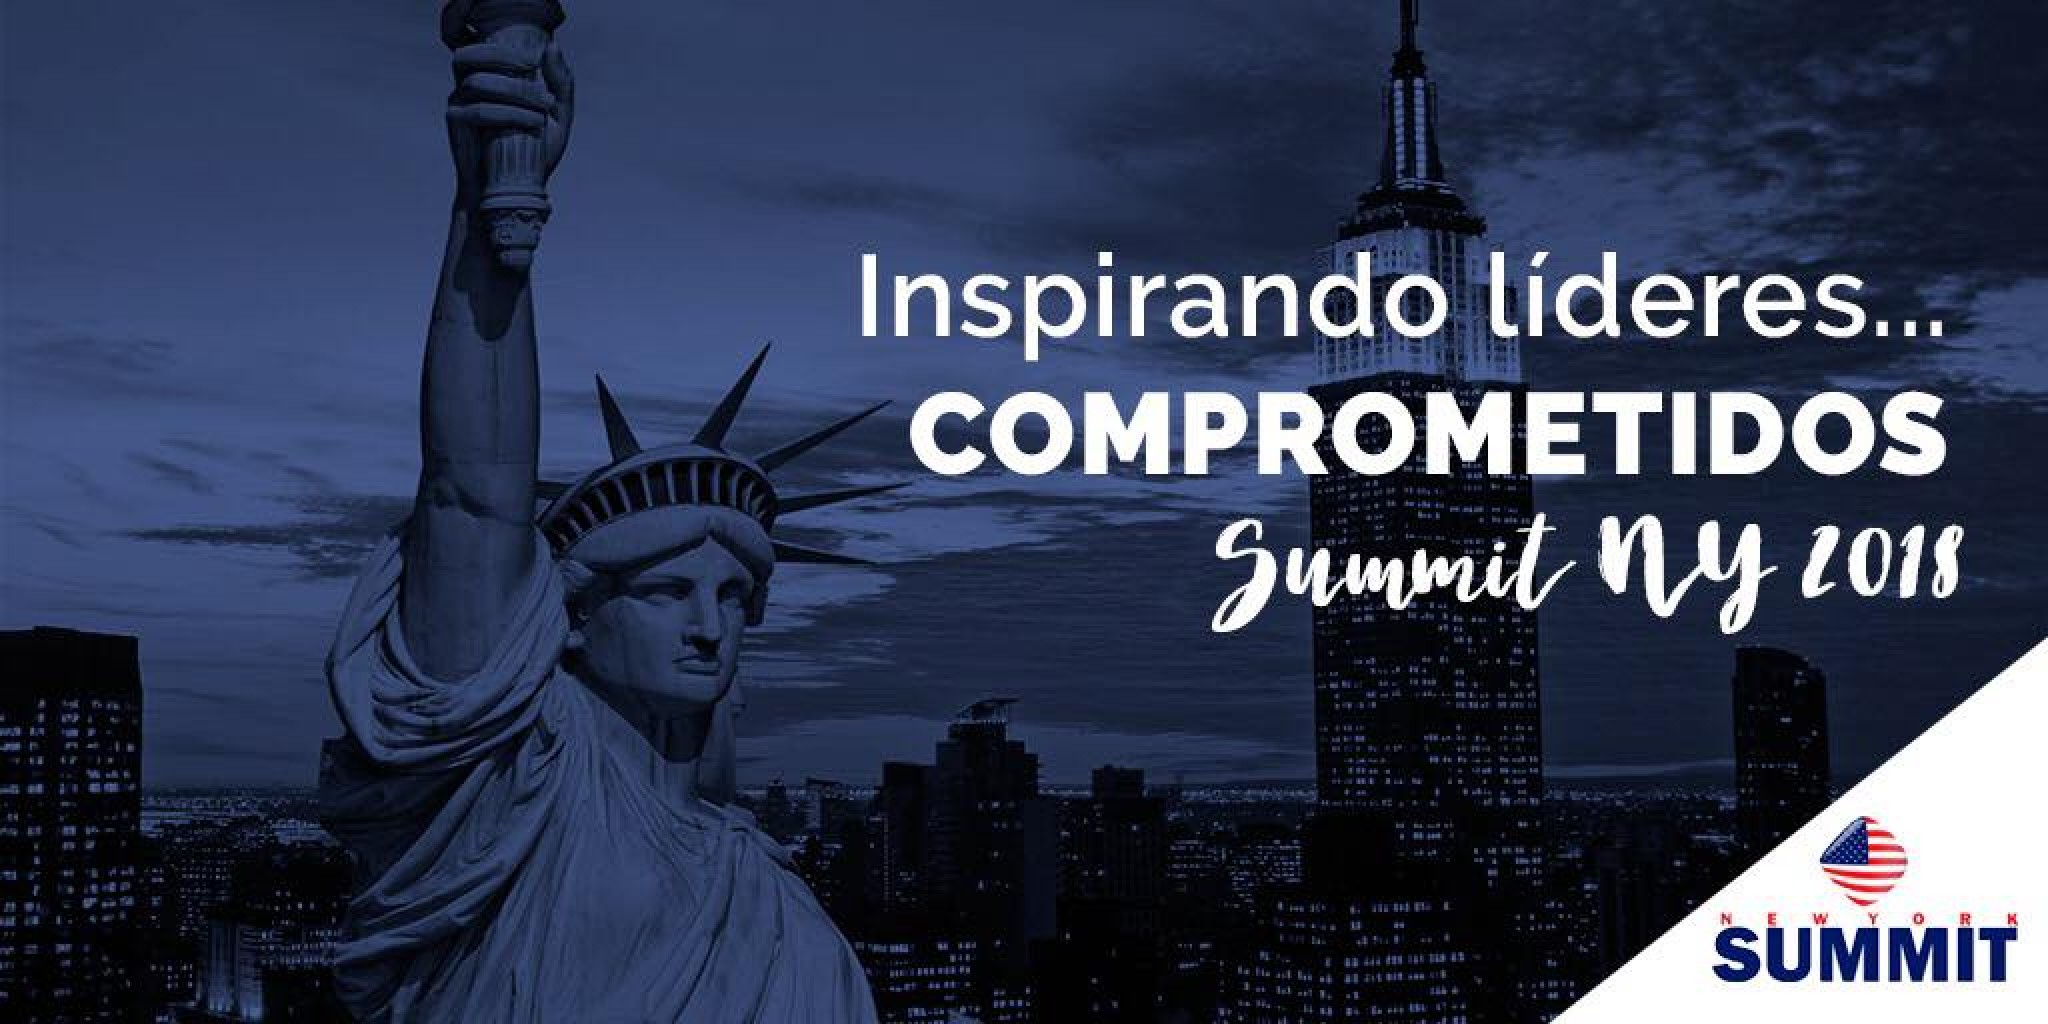 ENTREPRENEURS AND POLITICIANS WILL ADDRESS THE SITUATION OF THE HISPANIC COMMUNITY IN THE U.S. 